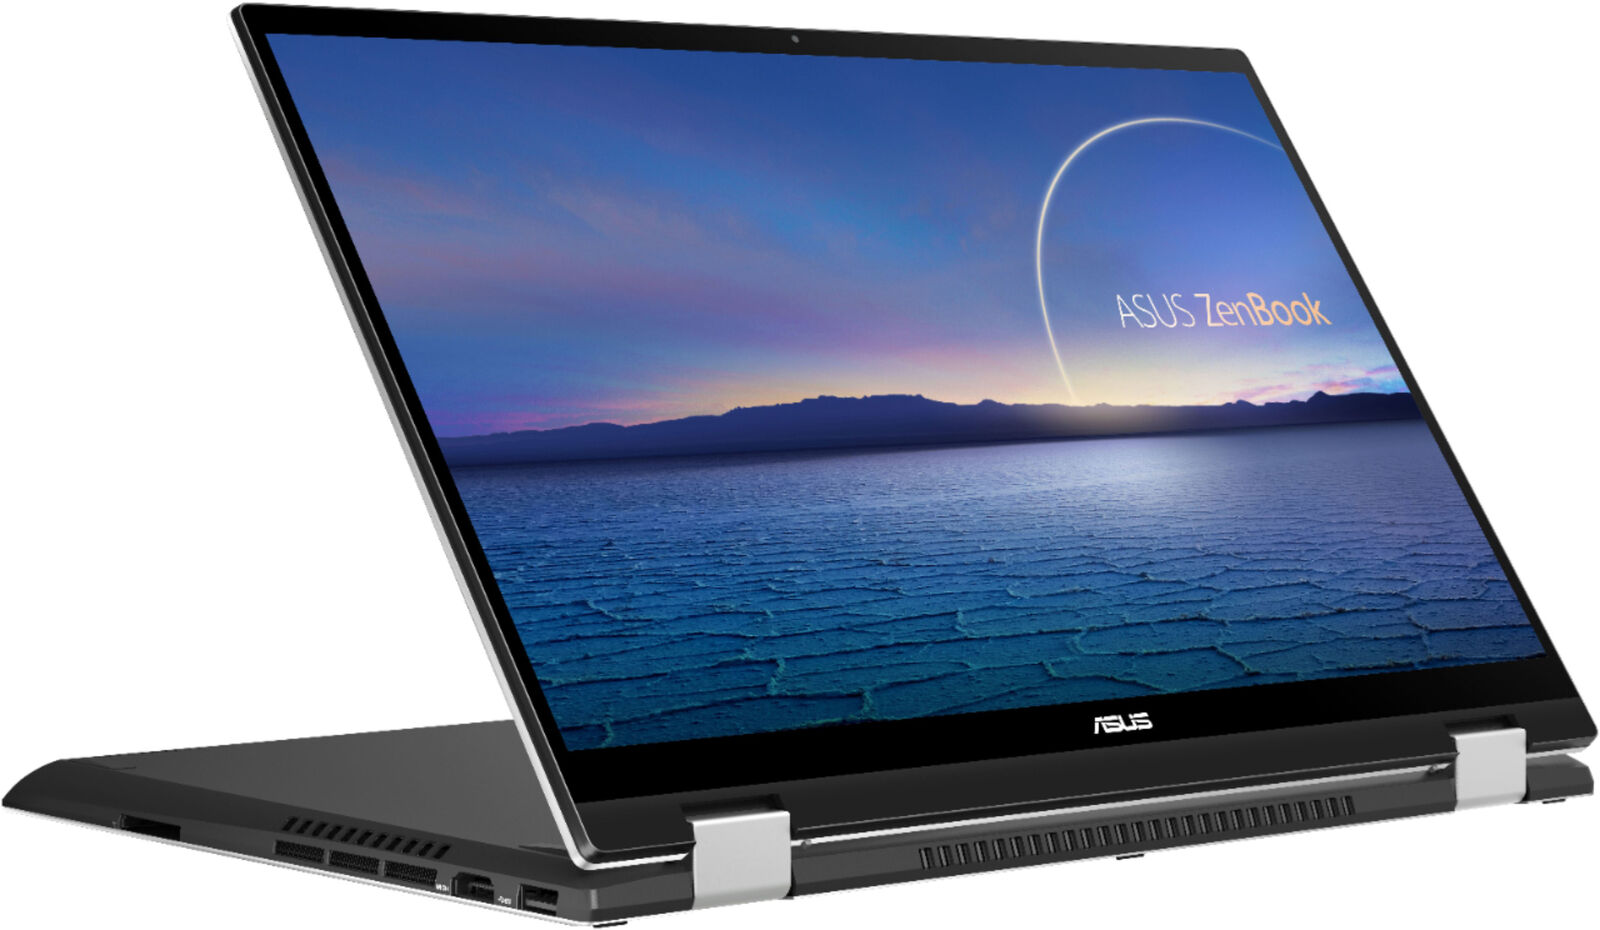 (Open-Box Excellent) ASUS ZenBook Flip 15: 15.6" FHD IPS Touch, i7-1165G7, GTX 1650, 16GB DDR4, 512GB SSD $687.99 (New for $800.99)